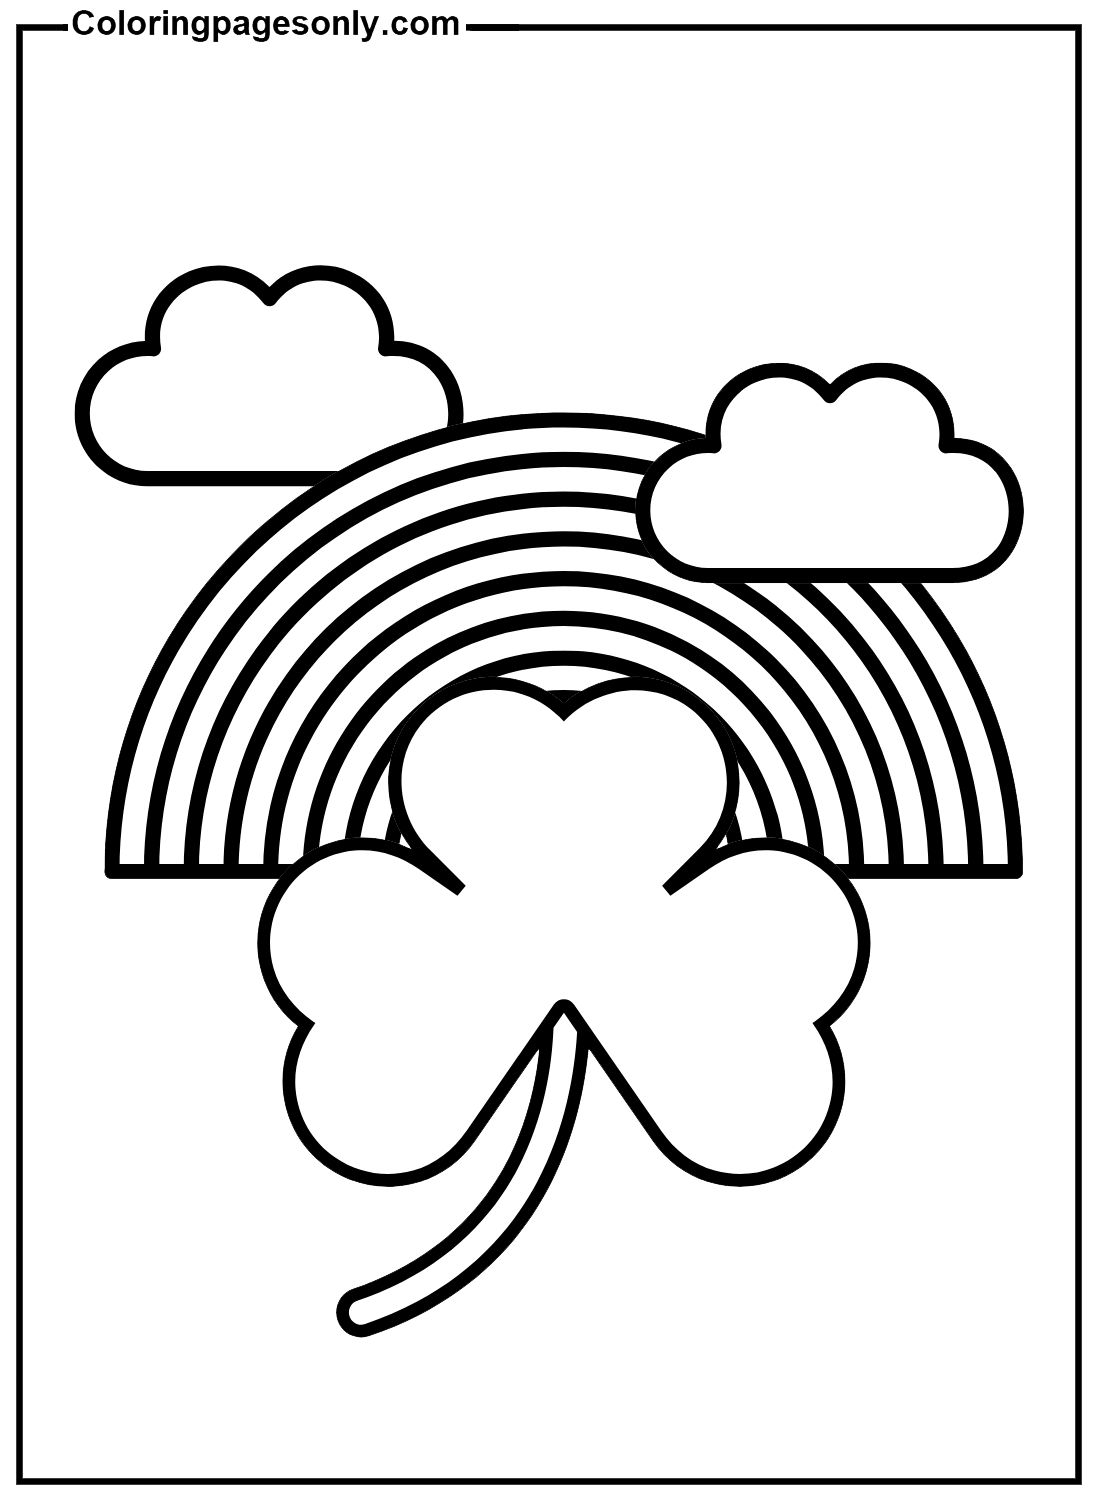 Rainbow With Shamrock Coloring Pages